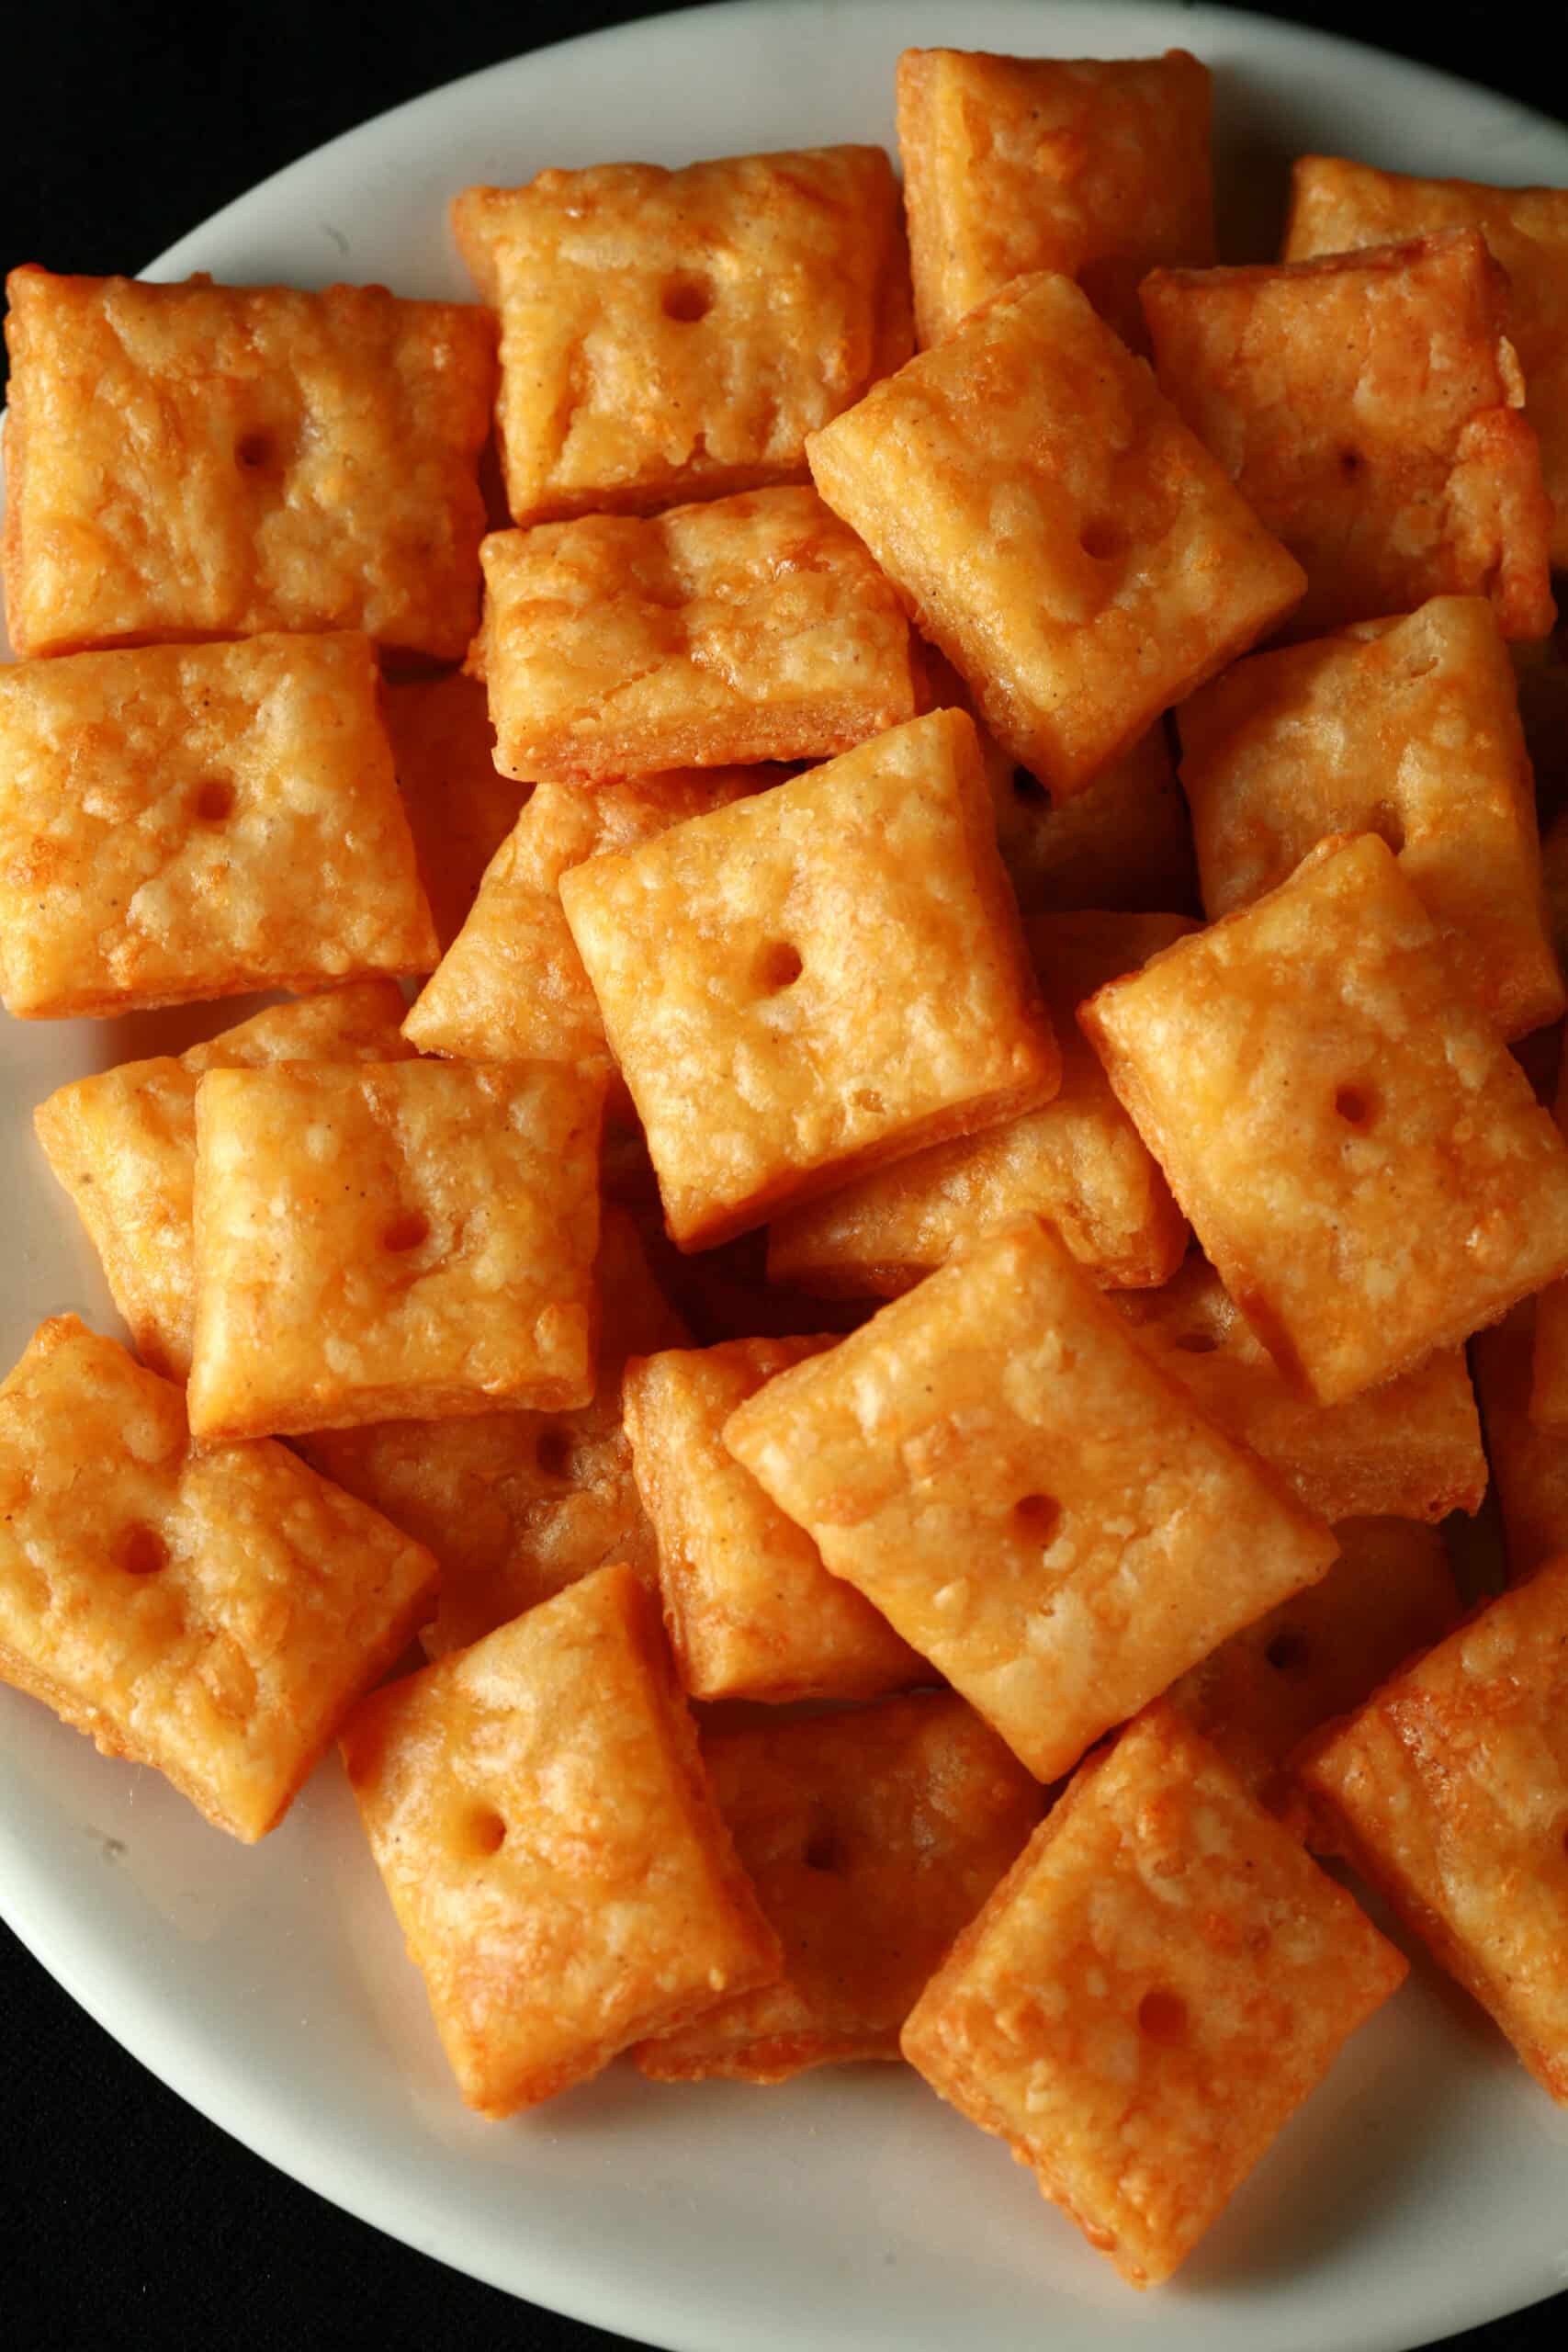 A plate of gluten free cheez its cheese crackers.